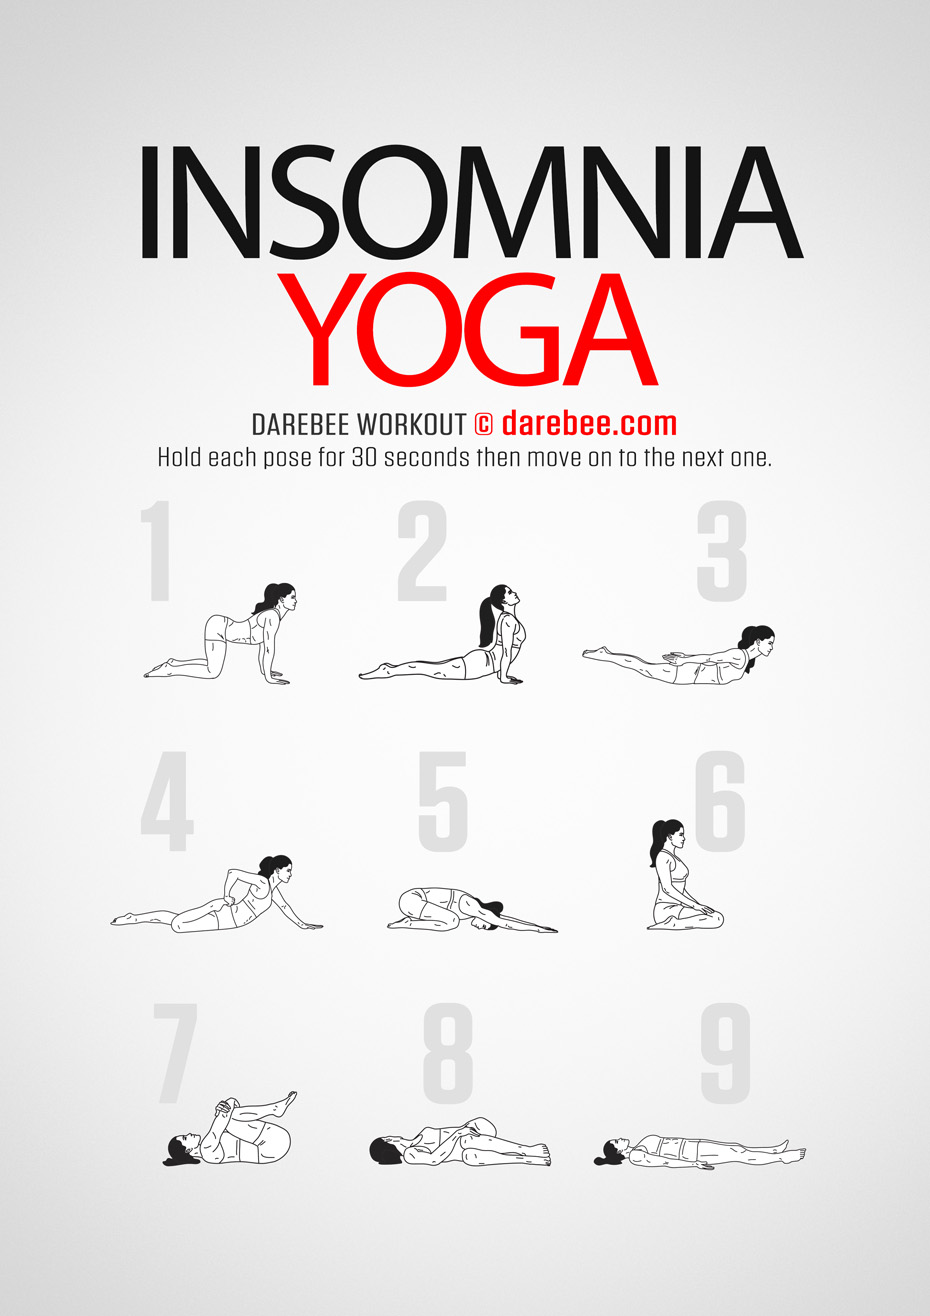 https://darebee.com/images/workouts/insomnia-yoga-workout.jpg